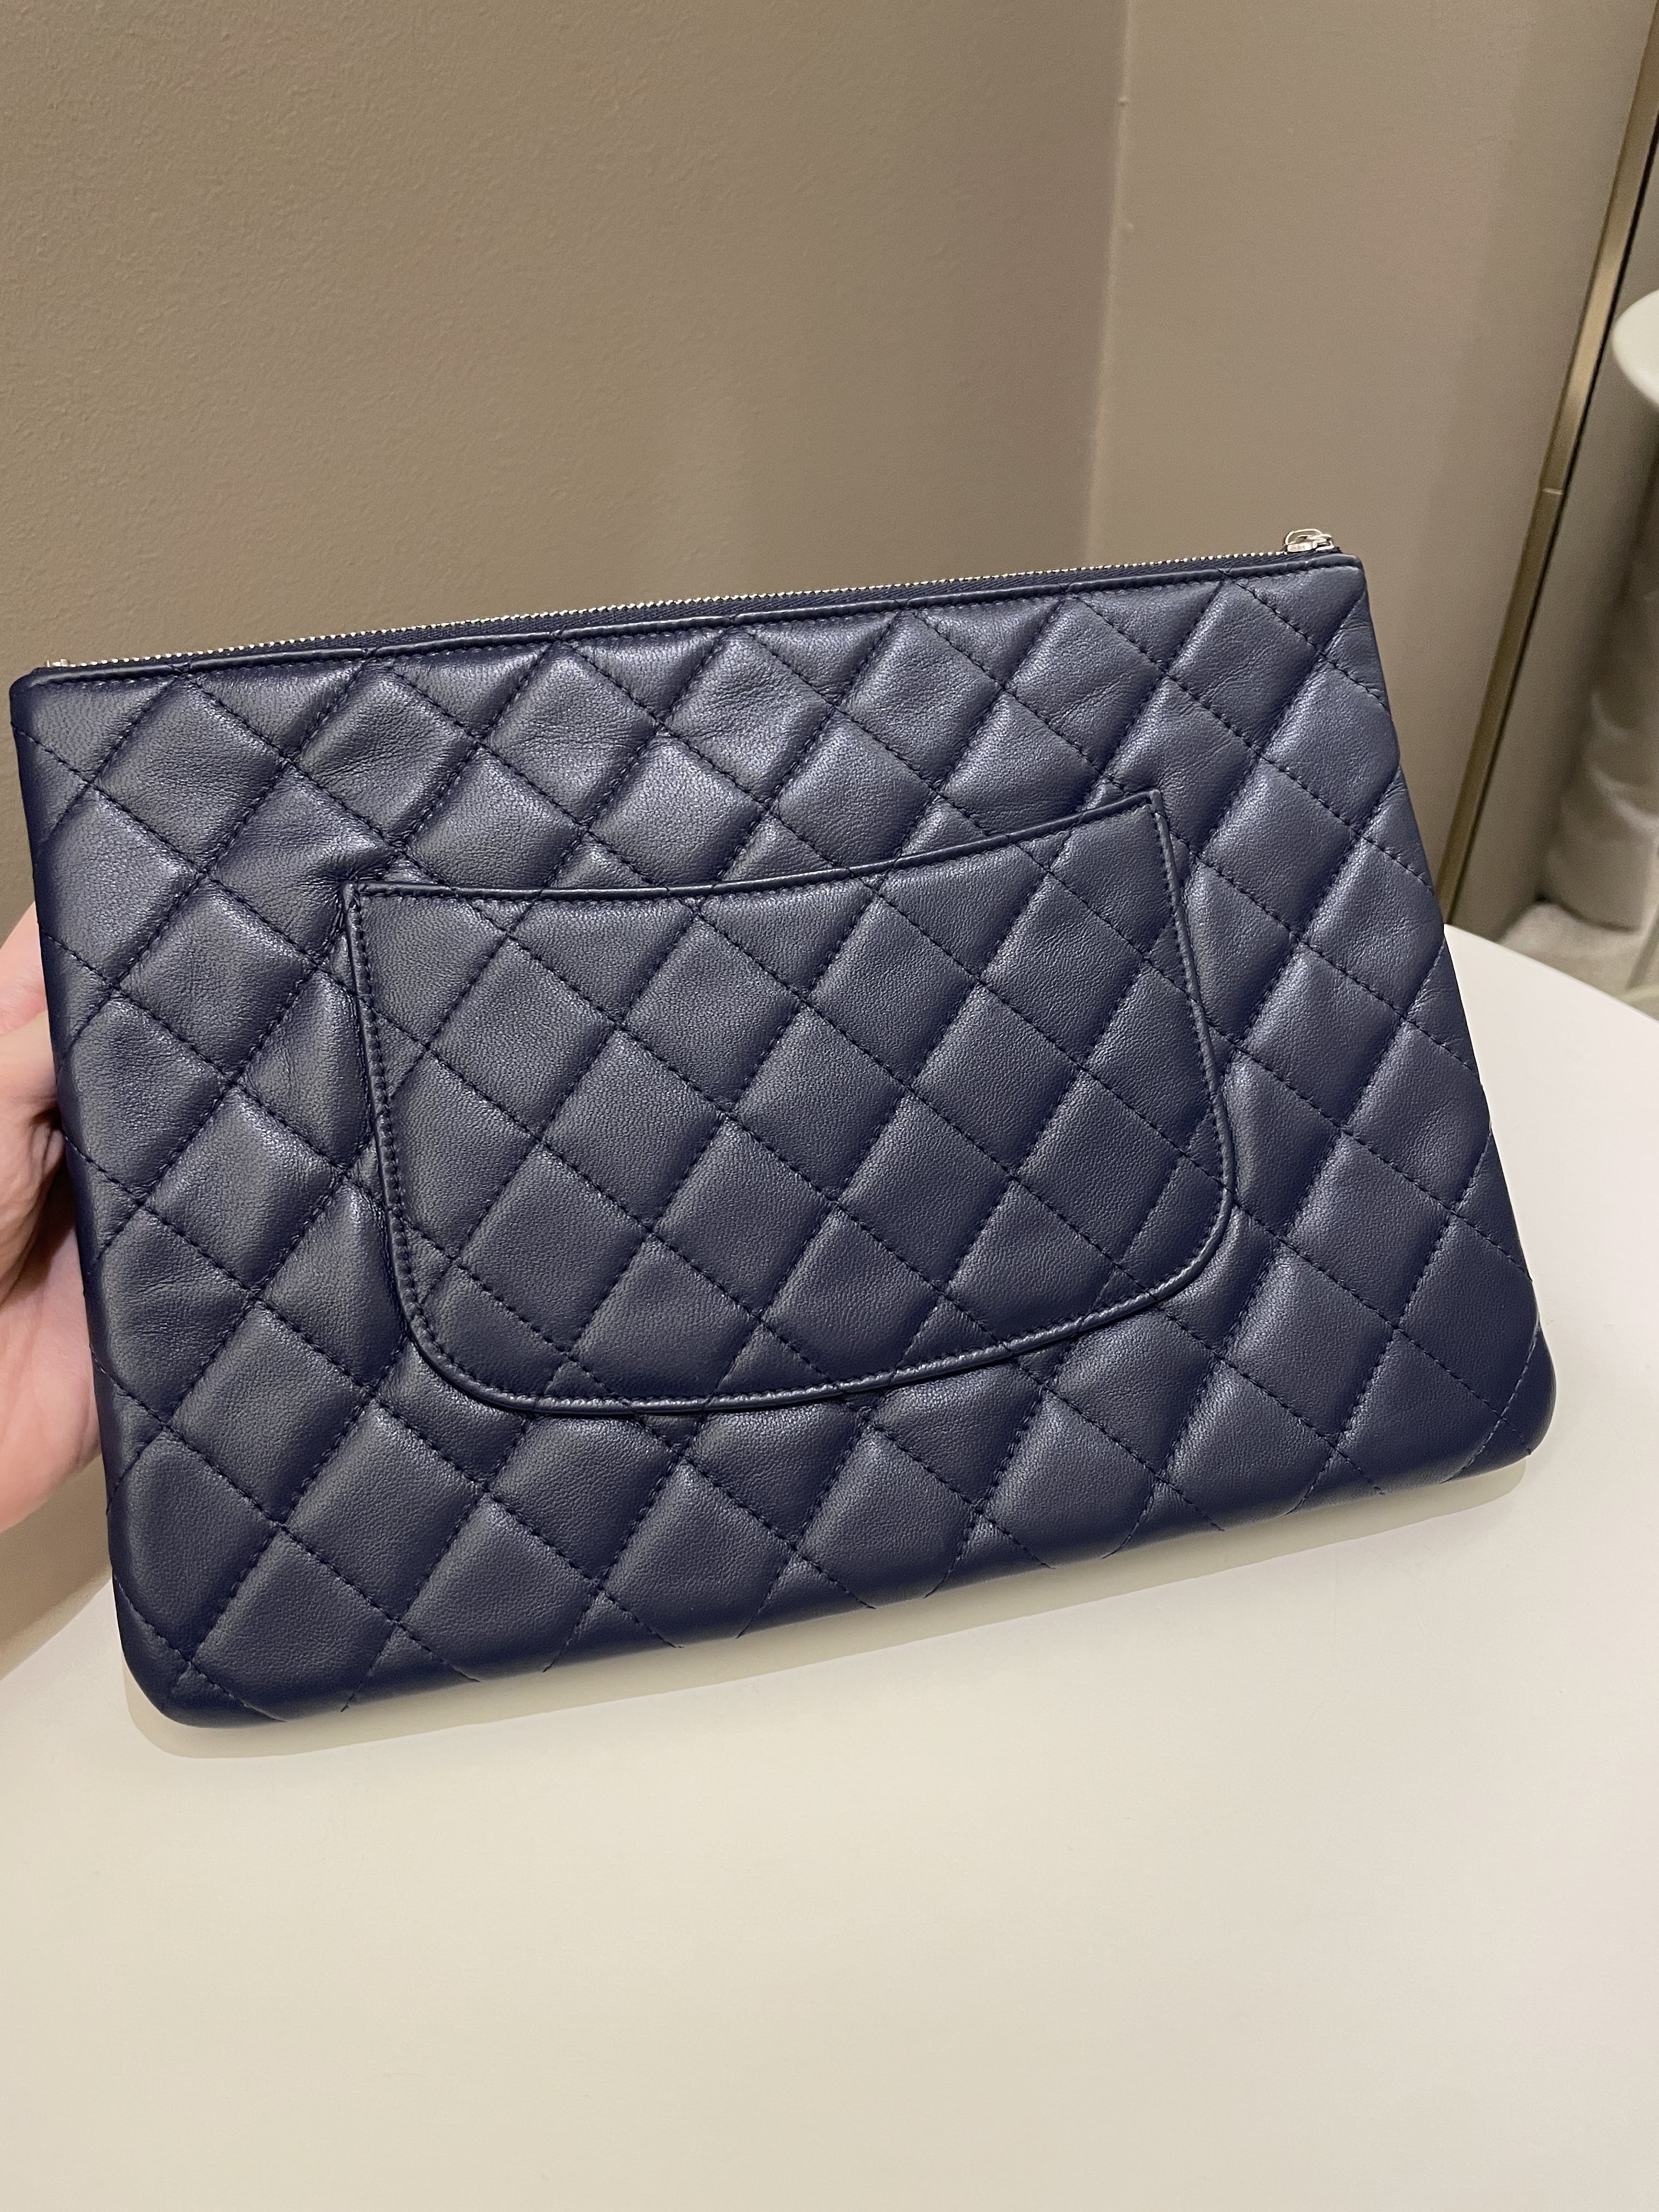 Chanel Quilted Leather Multi Pocket Zip Clutch
Multicolor